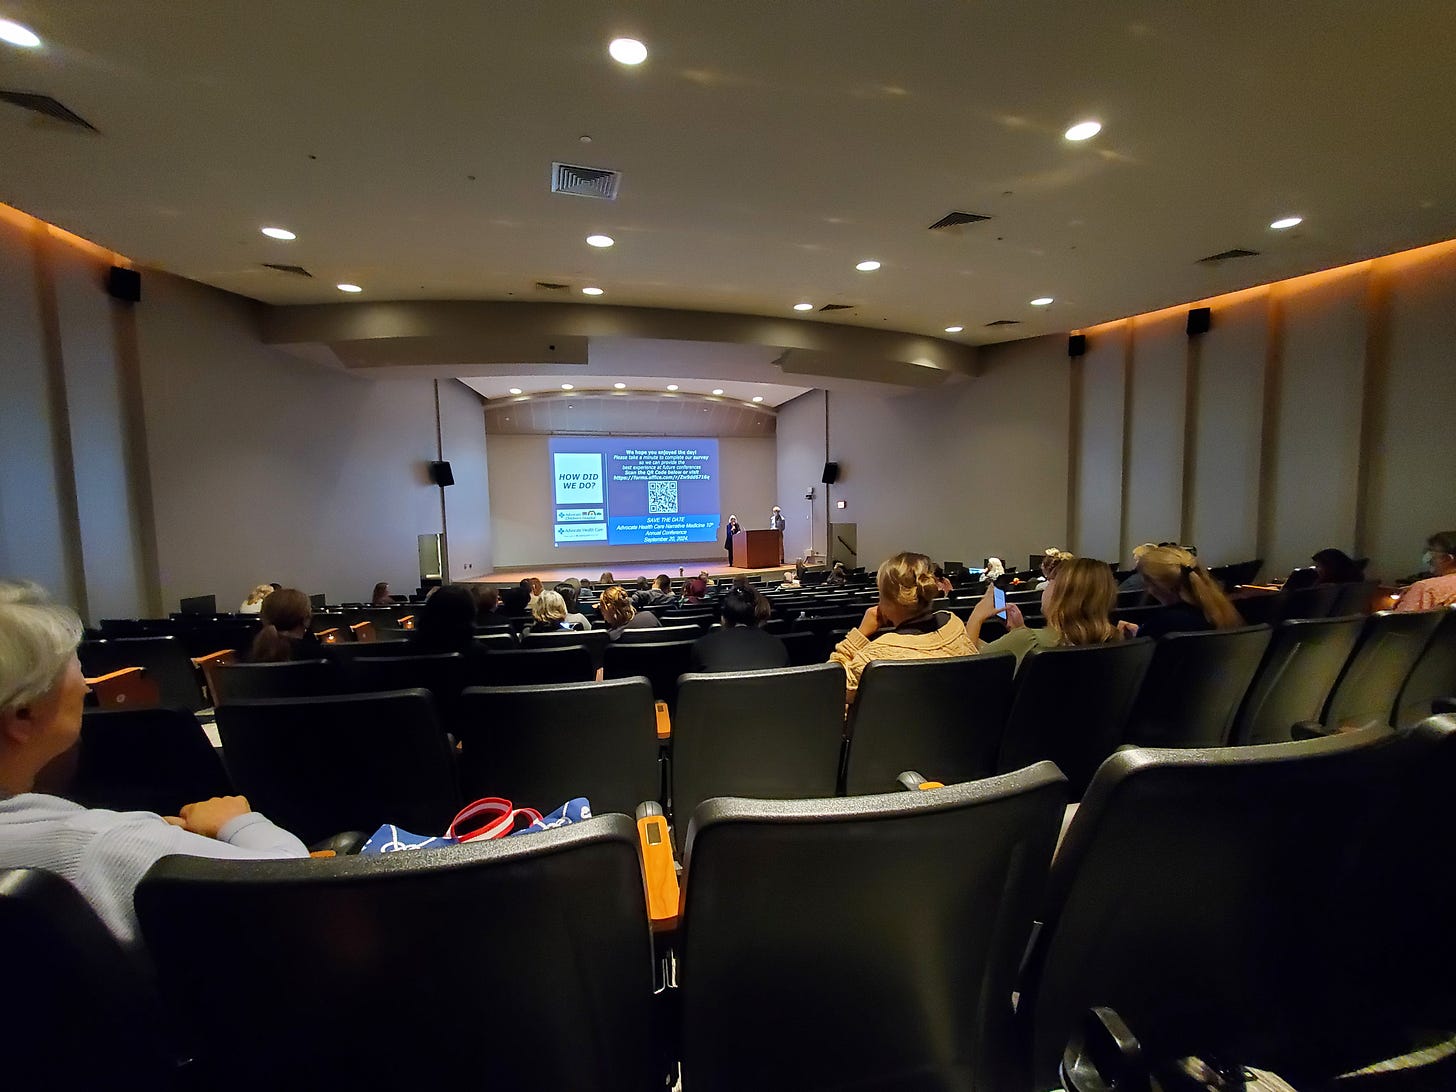 an auditorium with seats and a presentation on the screen